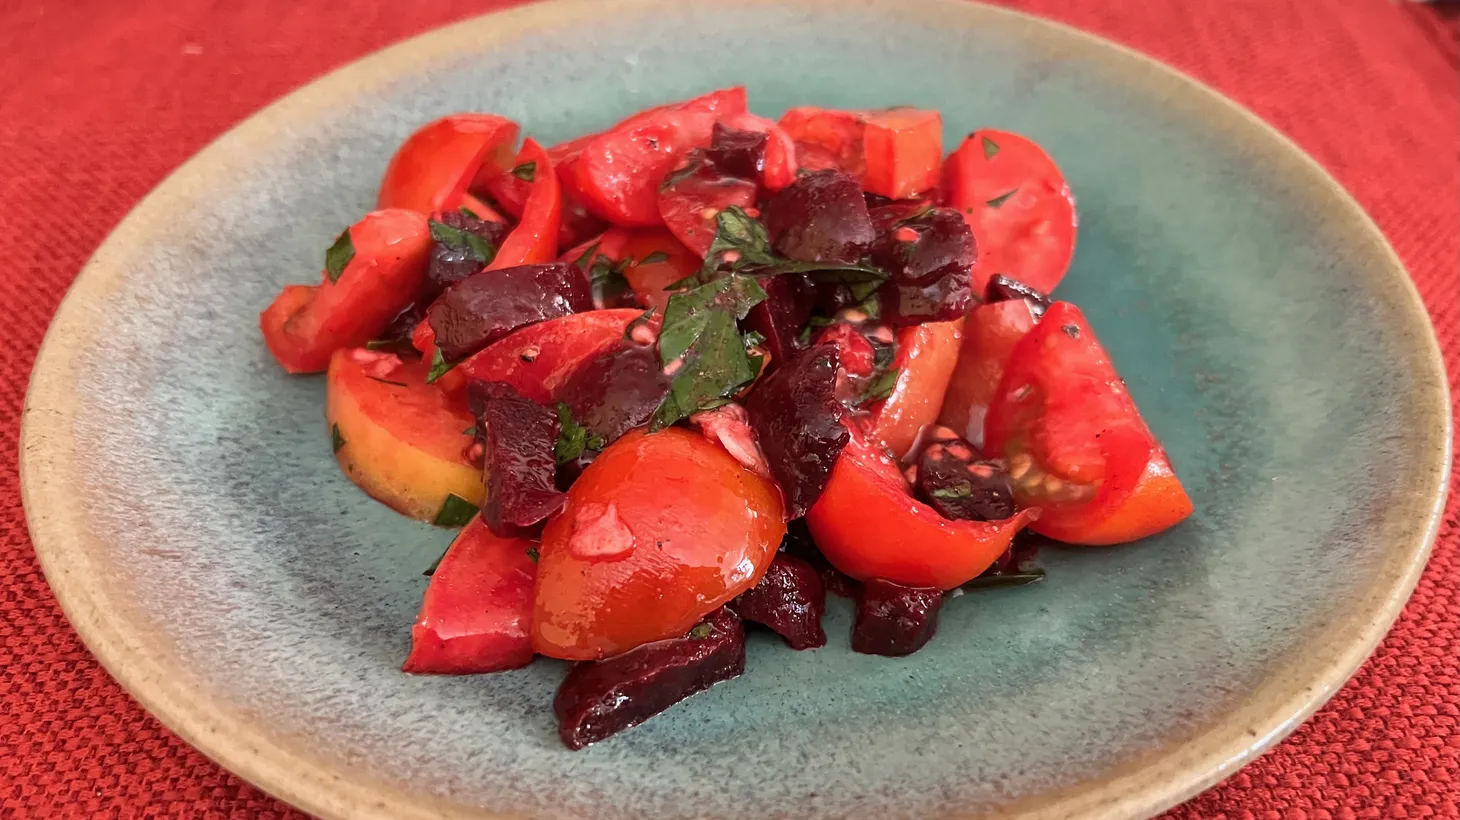 Liven up out-of-season tomatoes with beets.